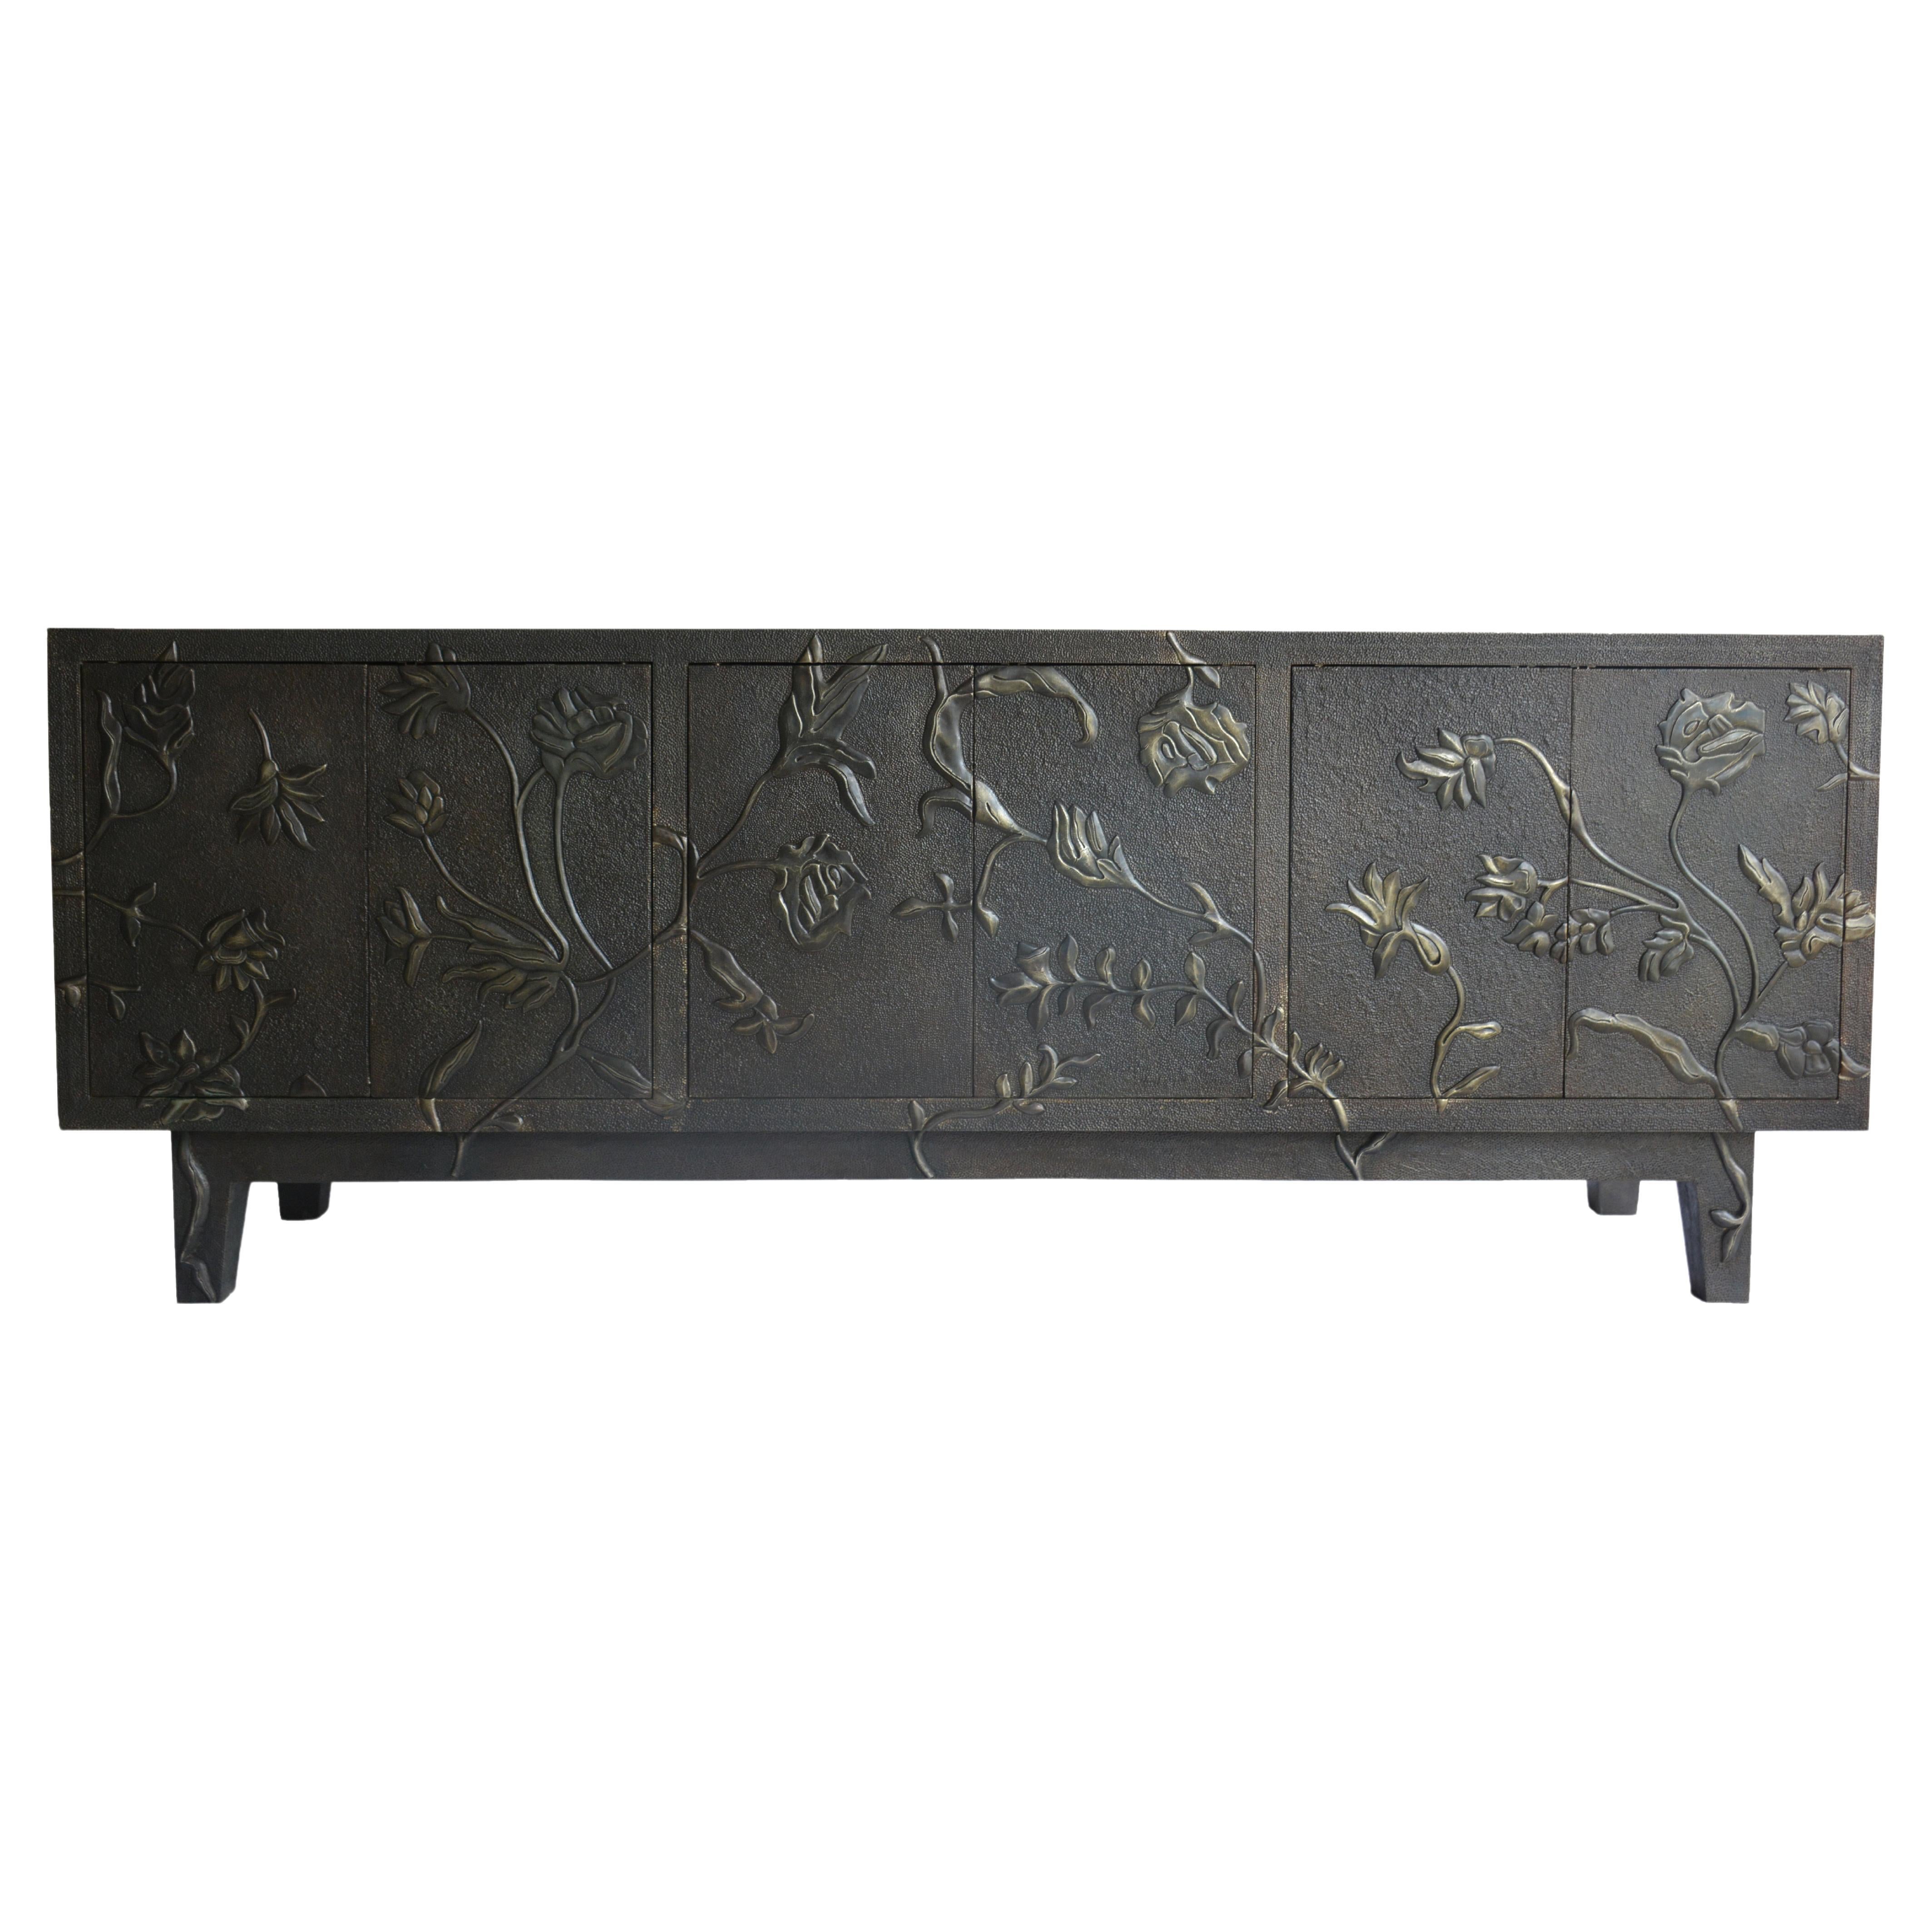 Floral Credenza in Antique White Bronze Clad Over MDF Handcrafted In India For Sale